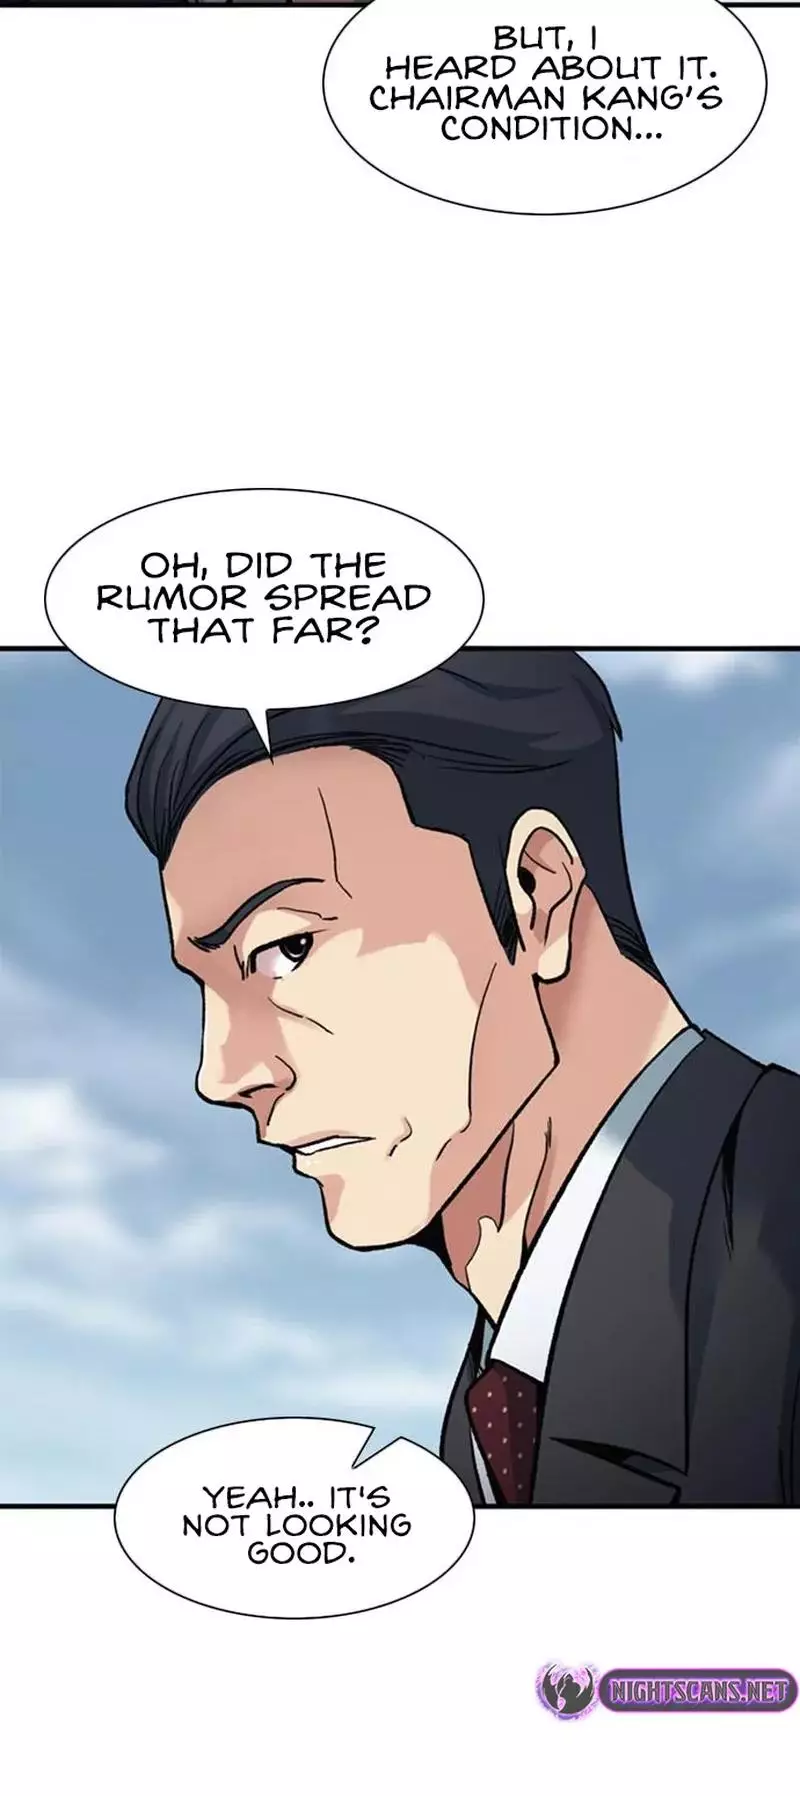 Chairman Kang, The New Employee - 13 page 58-7528e8d1